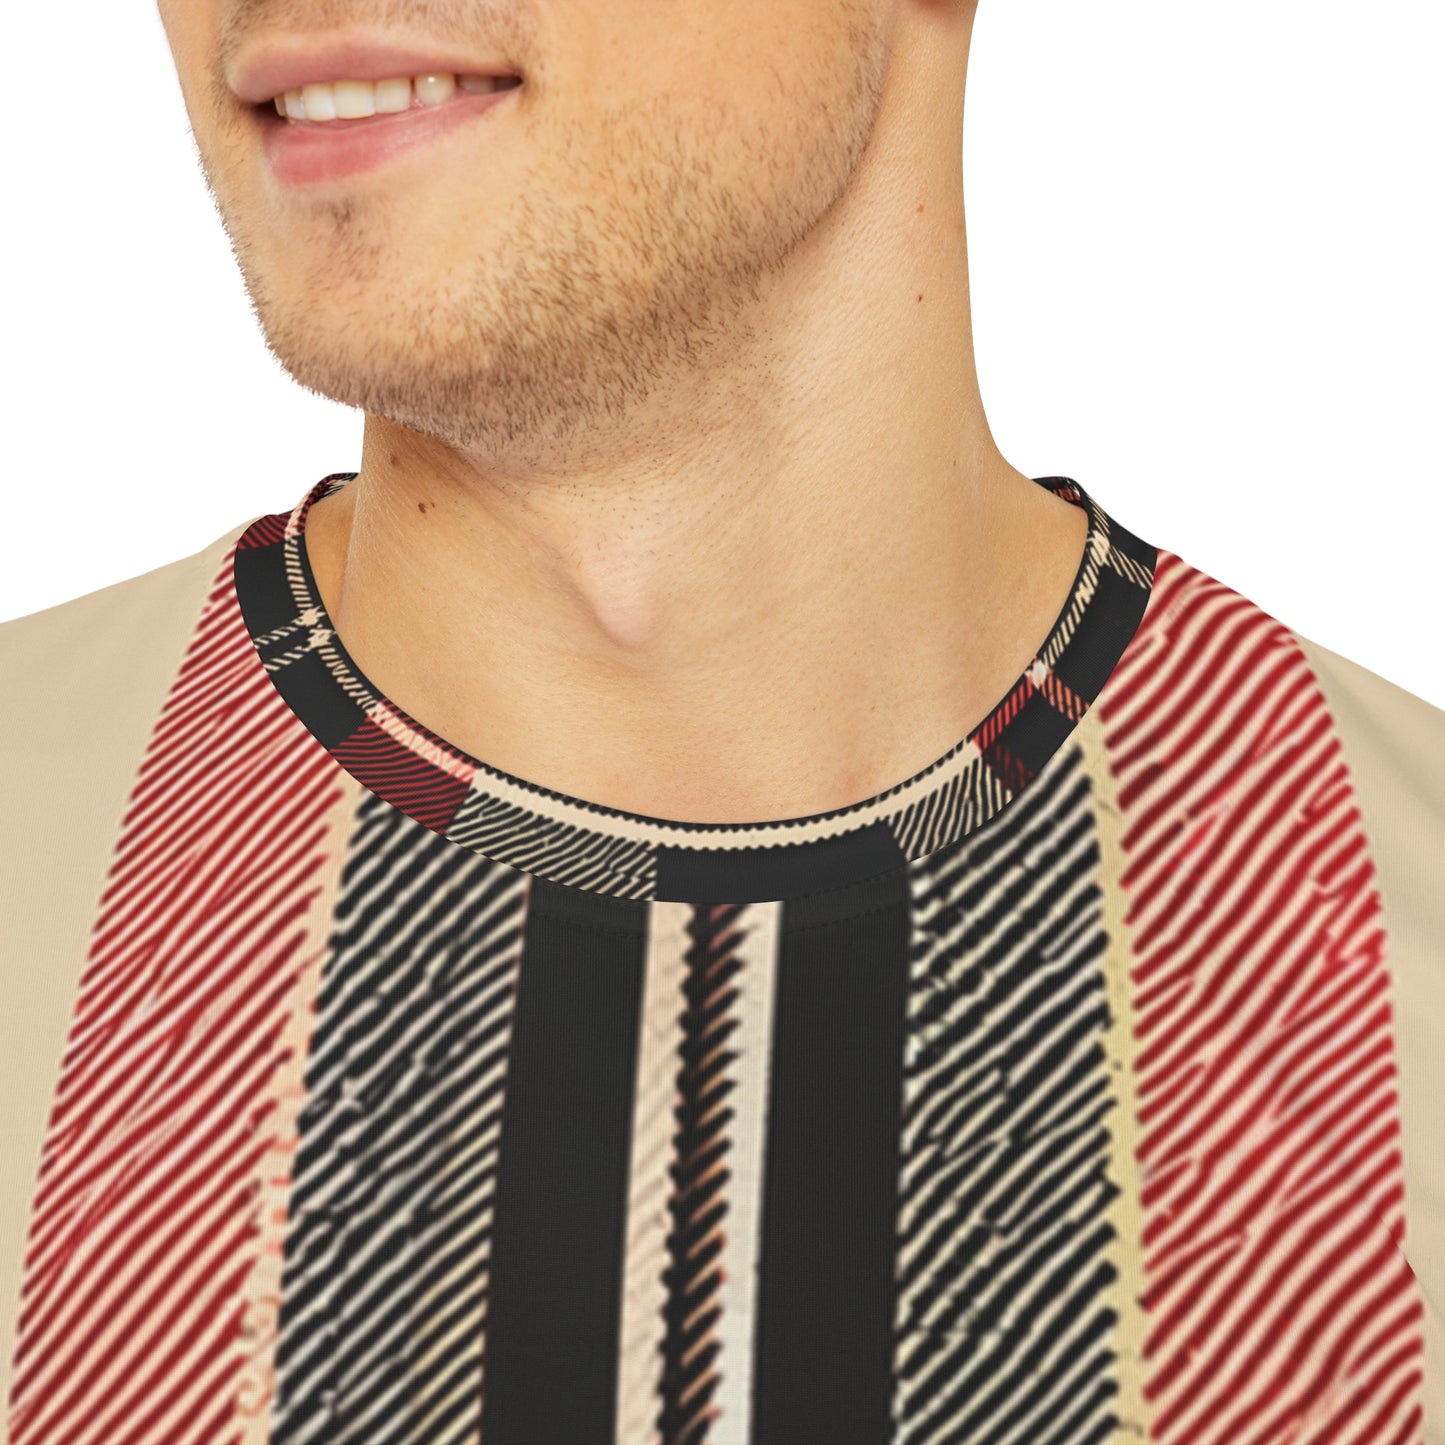 Close-up shot of the Autumn Elegance Tartan Crewneck Pullover All-Over Print Short-Sleeved Shirt red black and beige background plaid pattern worn by a white man